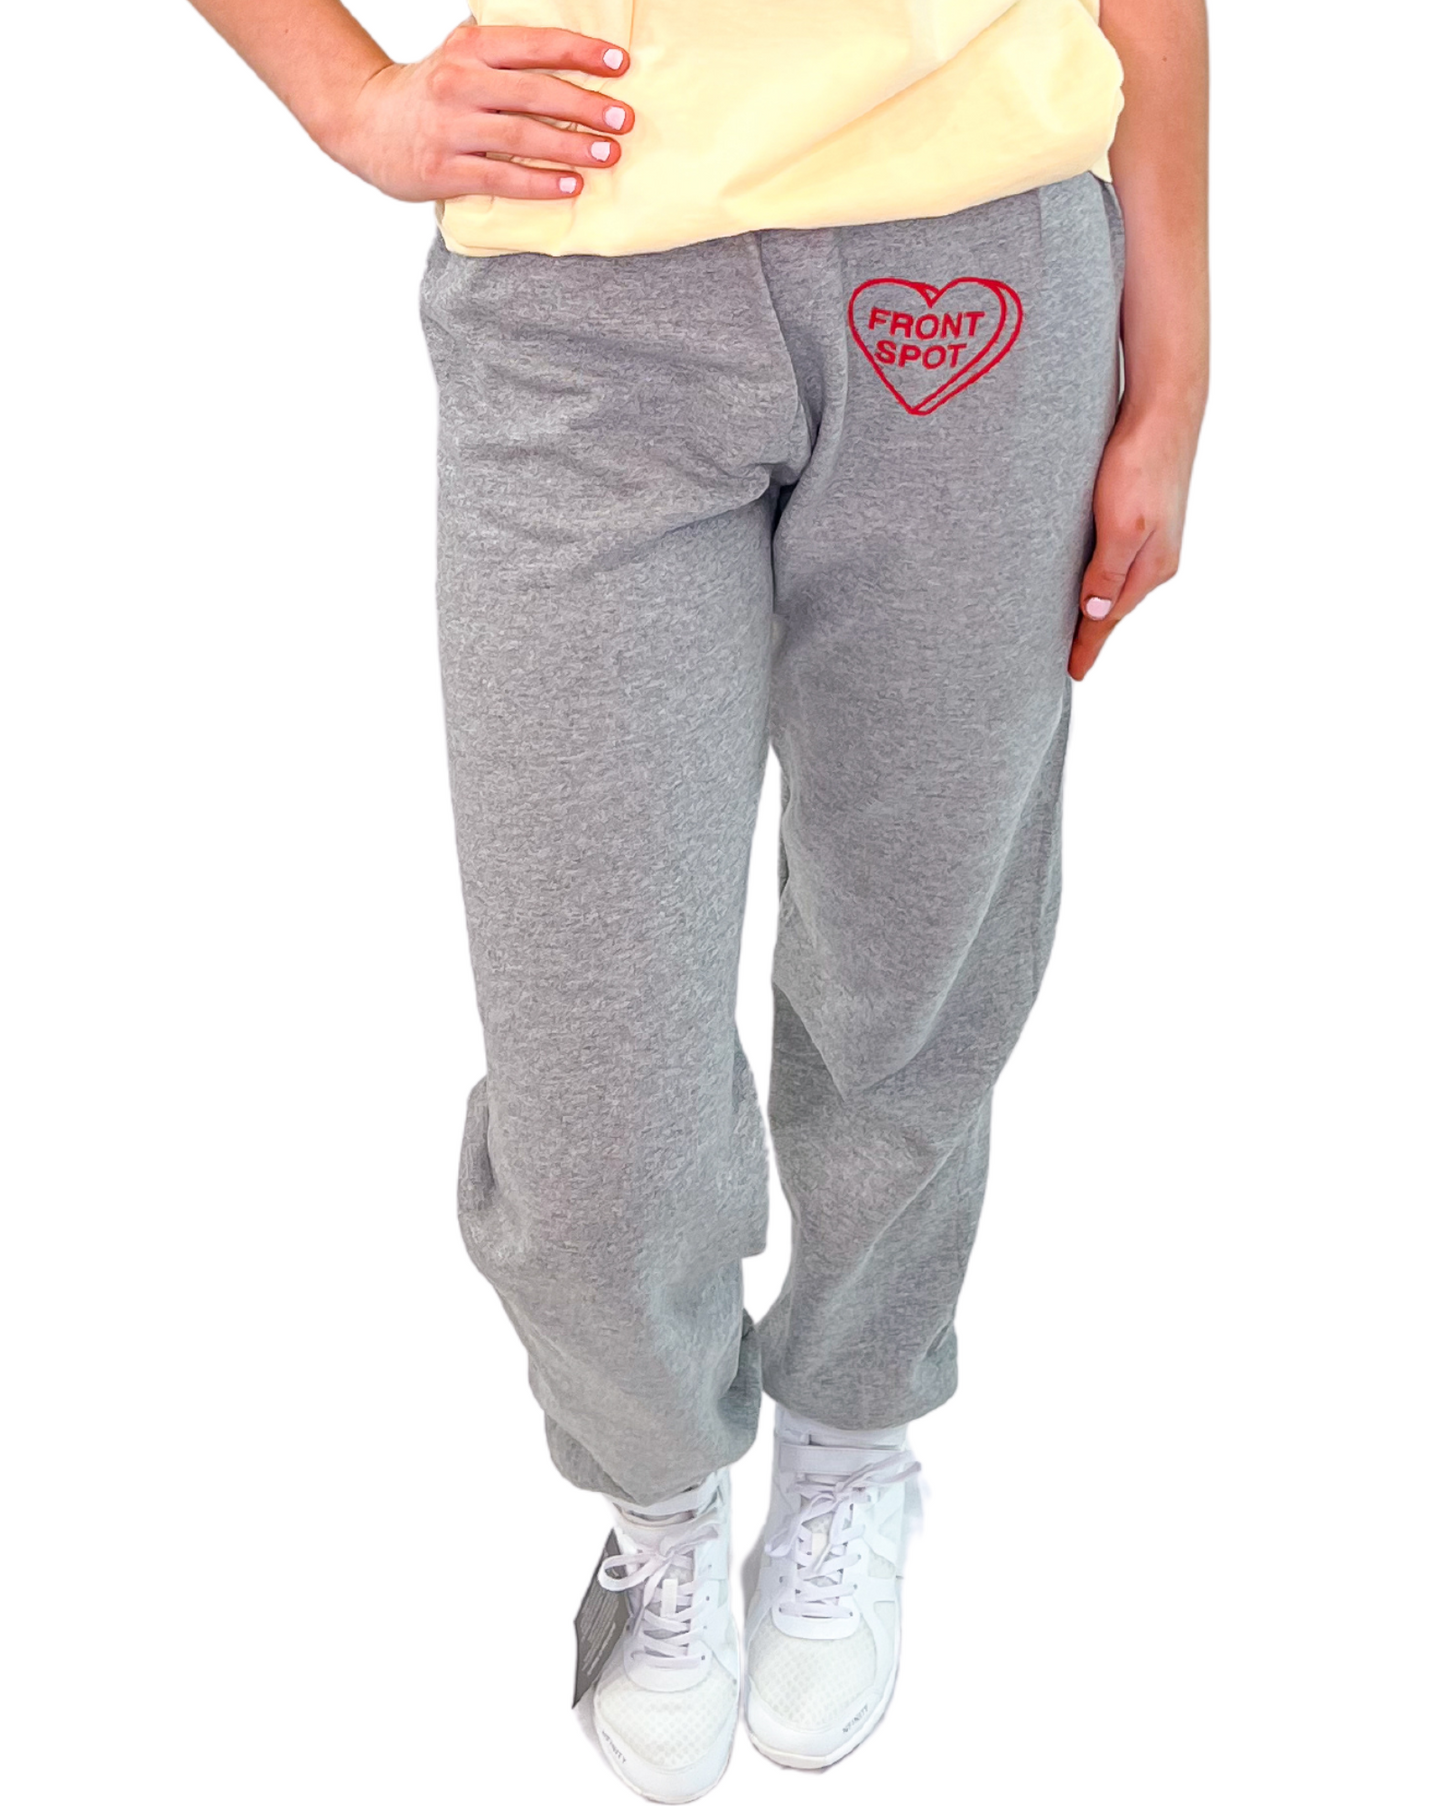 Candy Heart FRONT SPOT Joggers